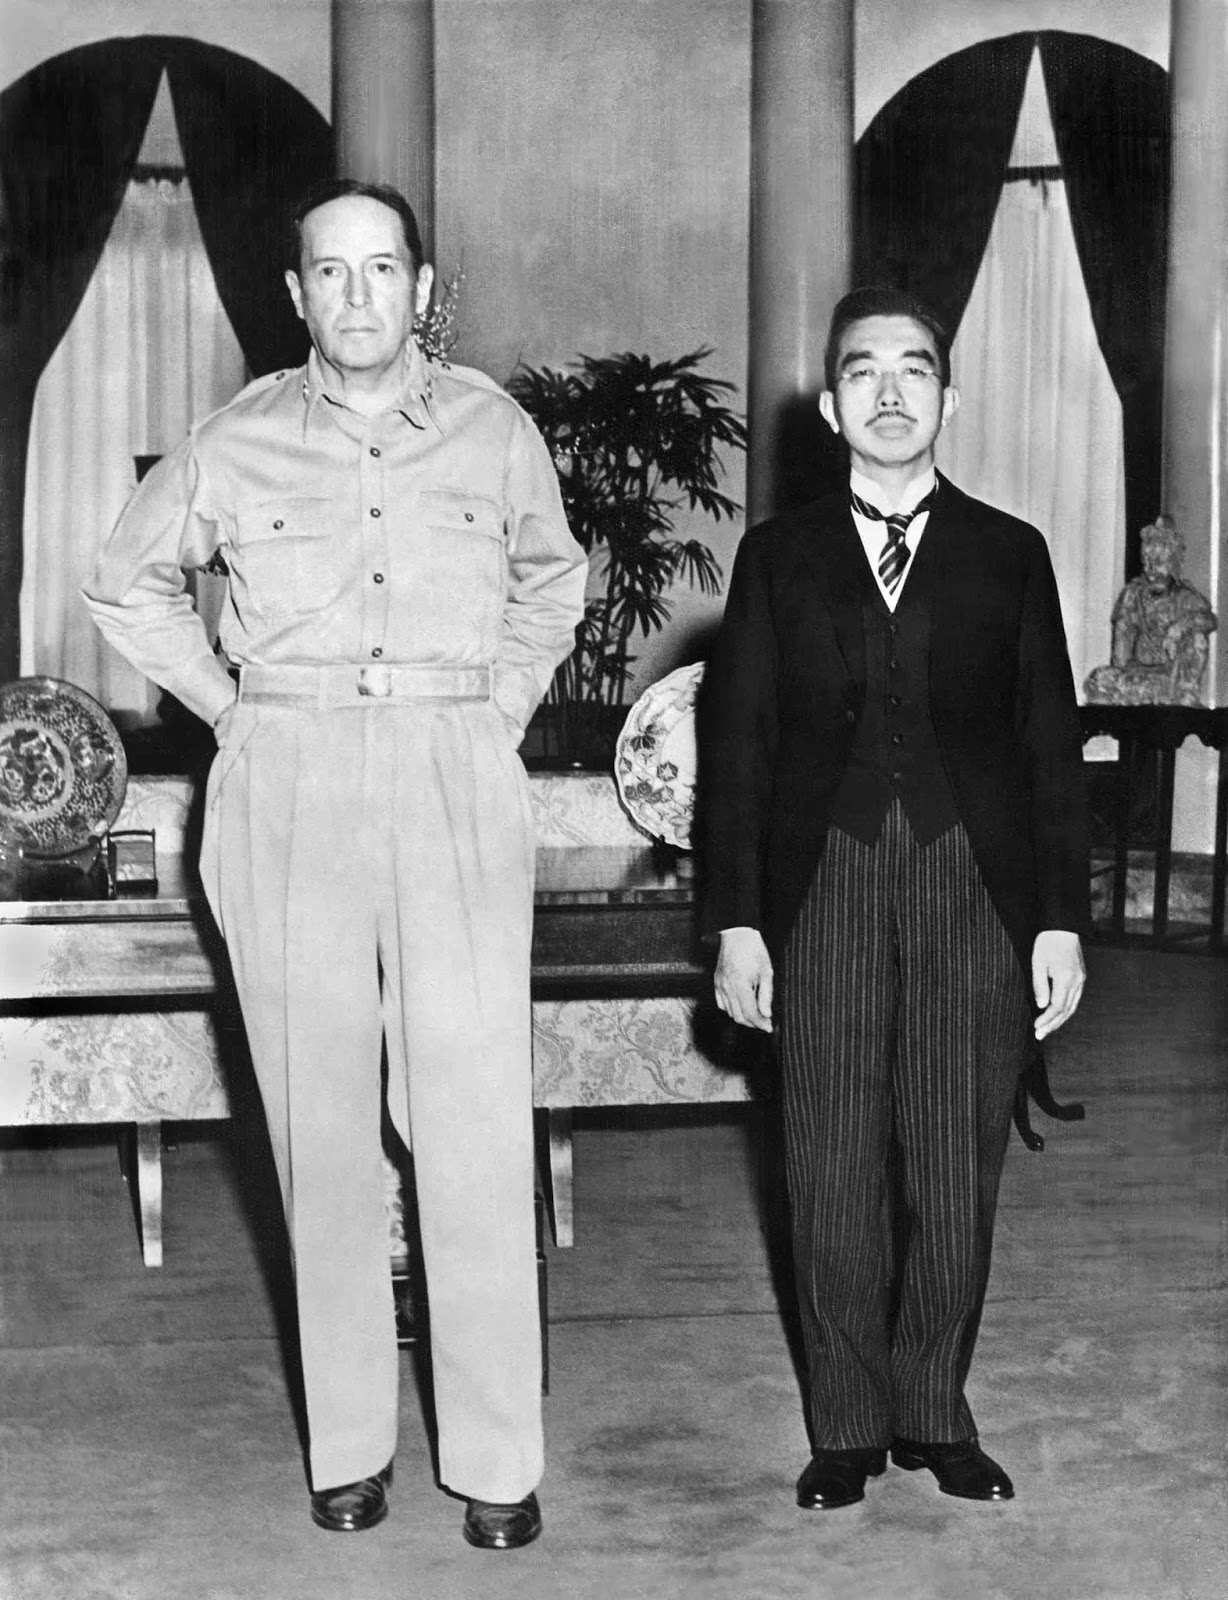 Emperor Hirohito and General MacArthur meeting for the first time, 1945.

Many Japanese were extremely offended by this picture because of how casual MacArthur is looking and standing while next to the Emperor, who was supposed to be a god.
The Japanese government immediately banned the photo of the Emperor with MacArthur under the grounds that it damaged the imperial mystique, but MacArthur rescinded the ban and ordered all of the Japanese newspapers to print it.